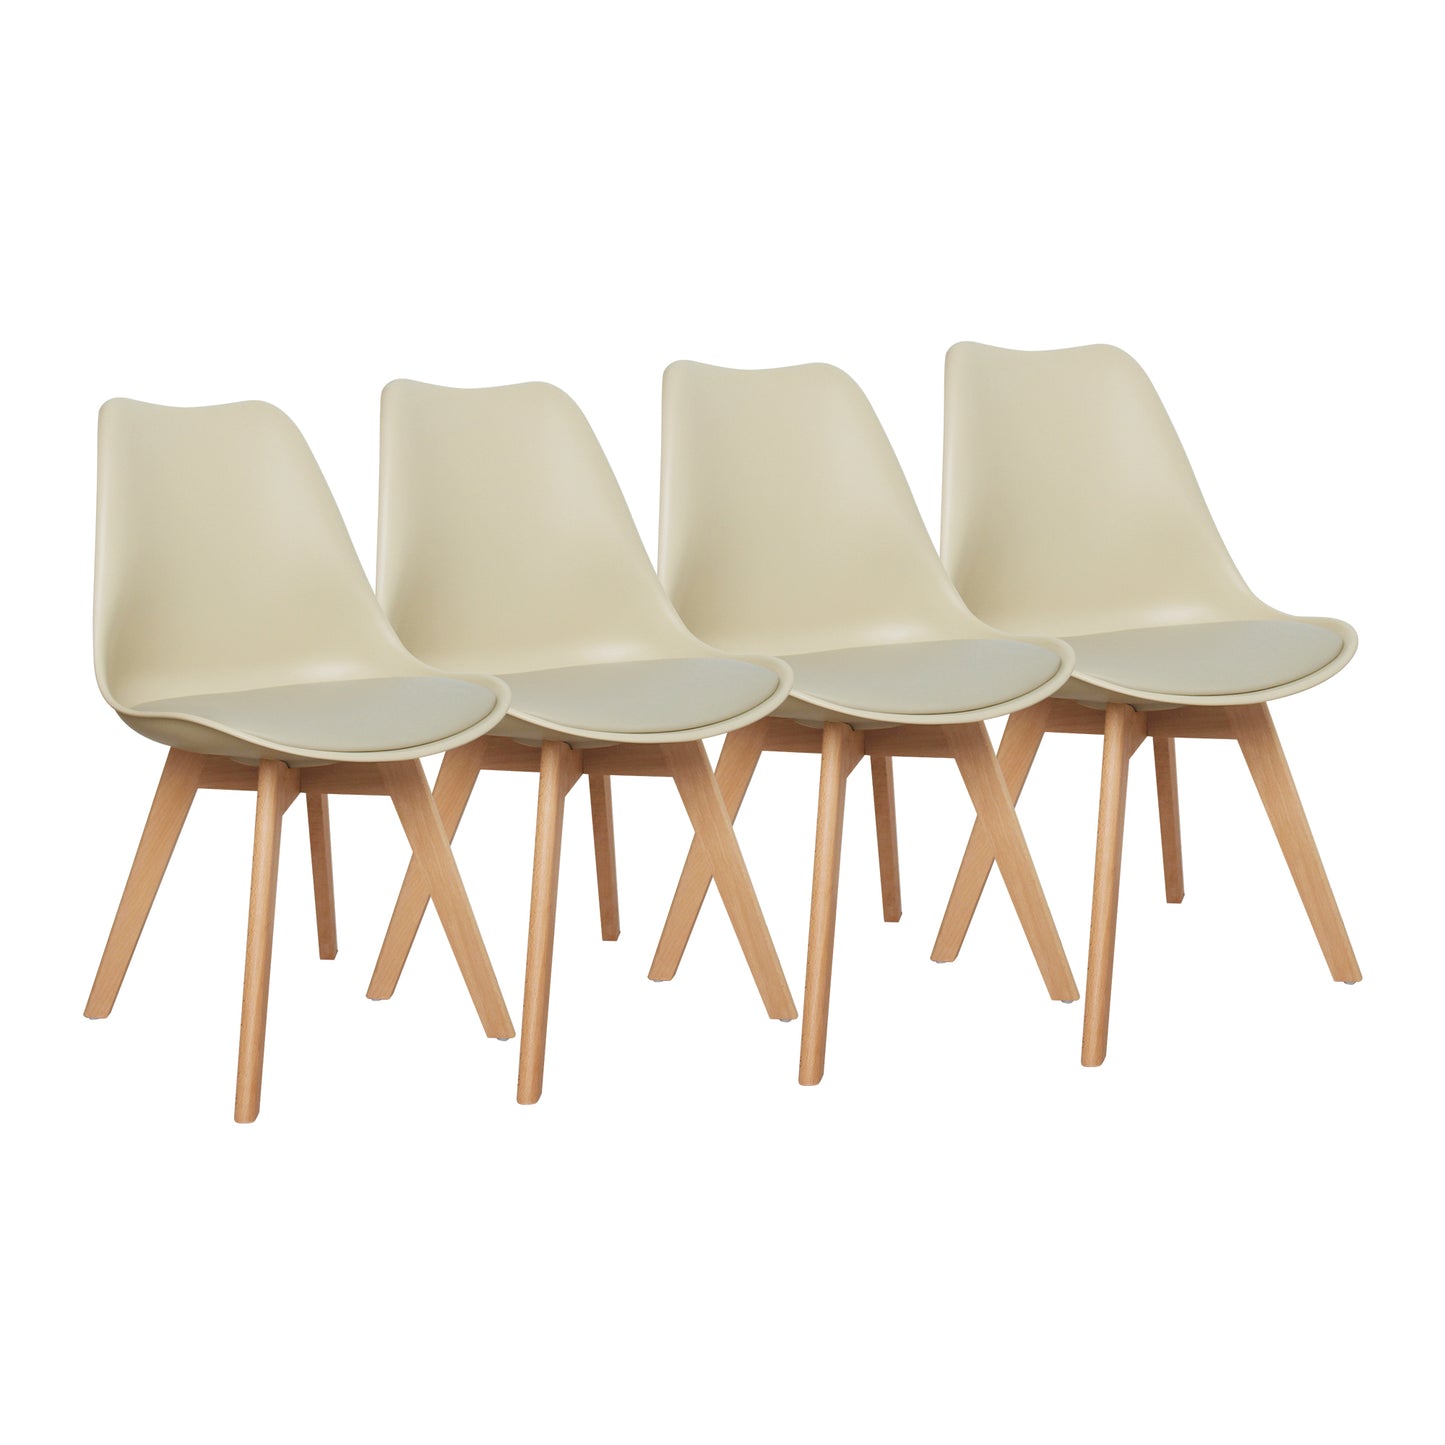 CHOTTO - Ando Dining Chairs - Beige x 4